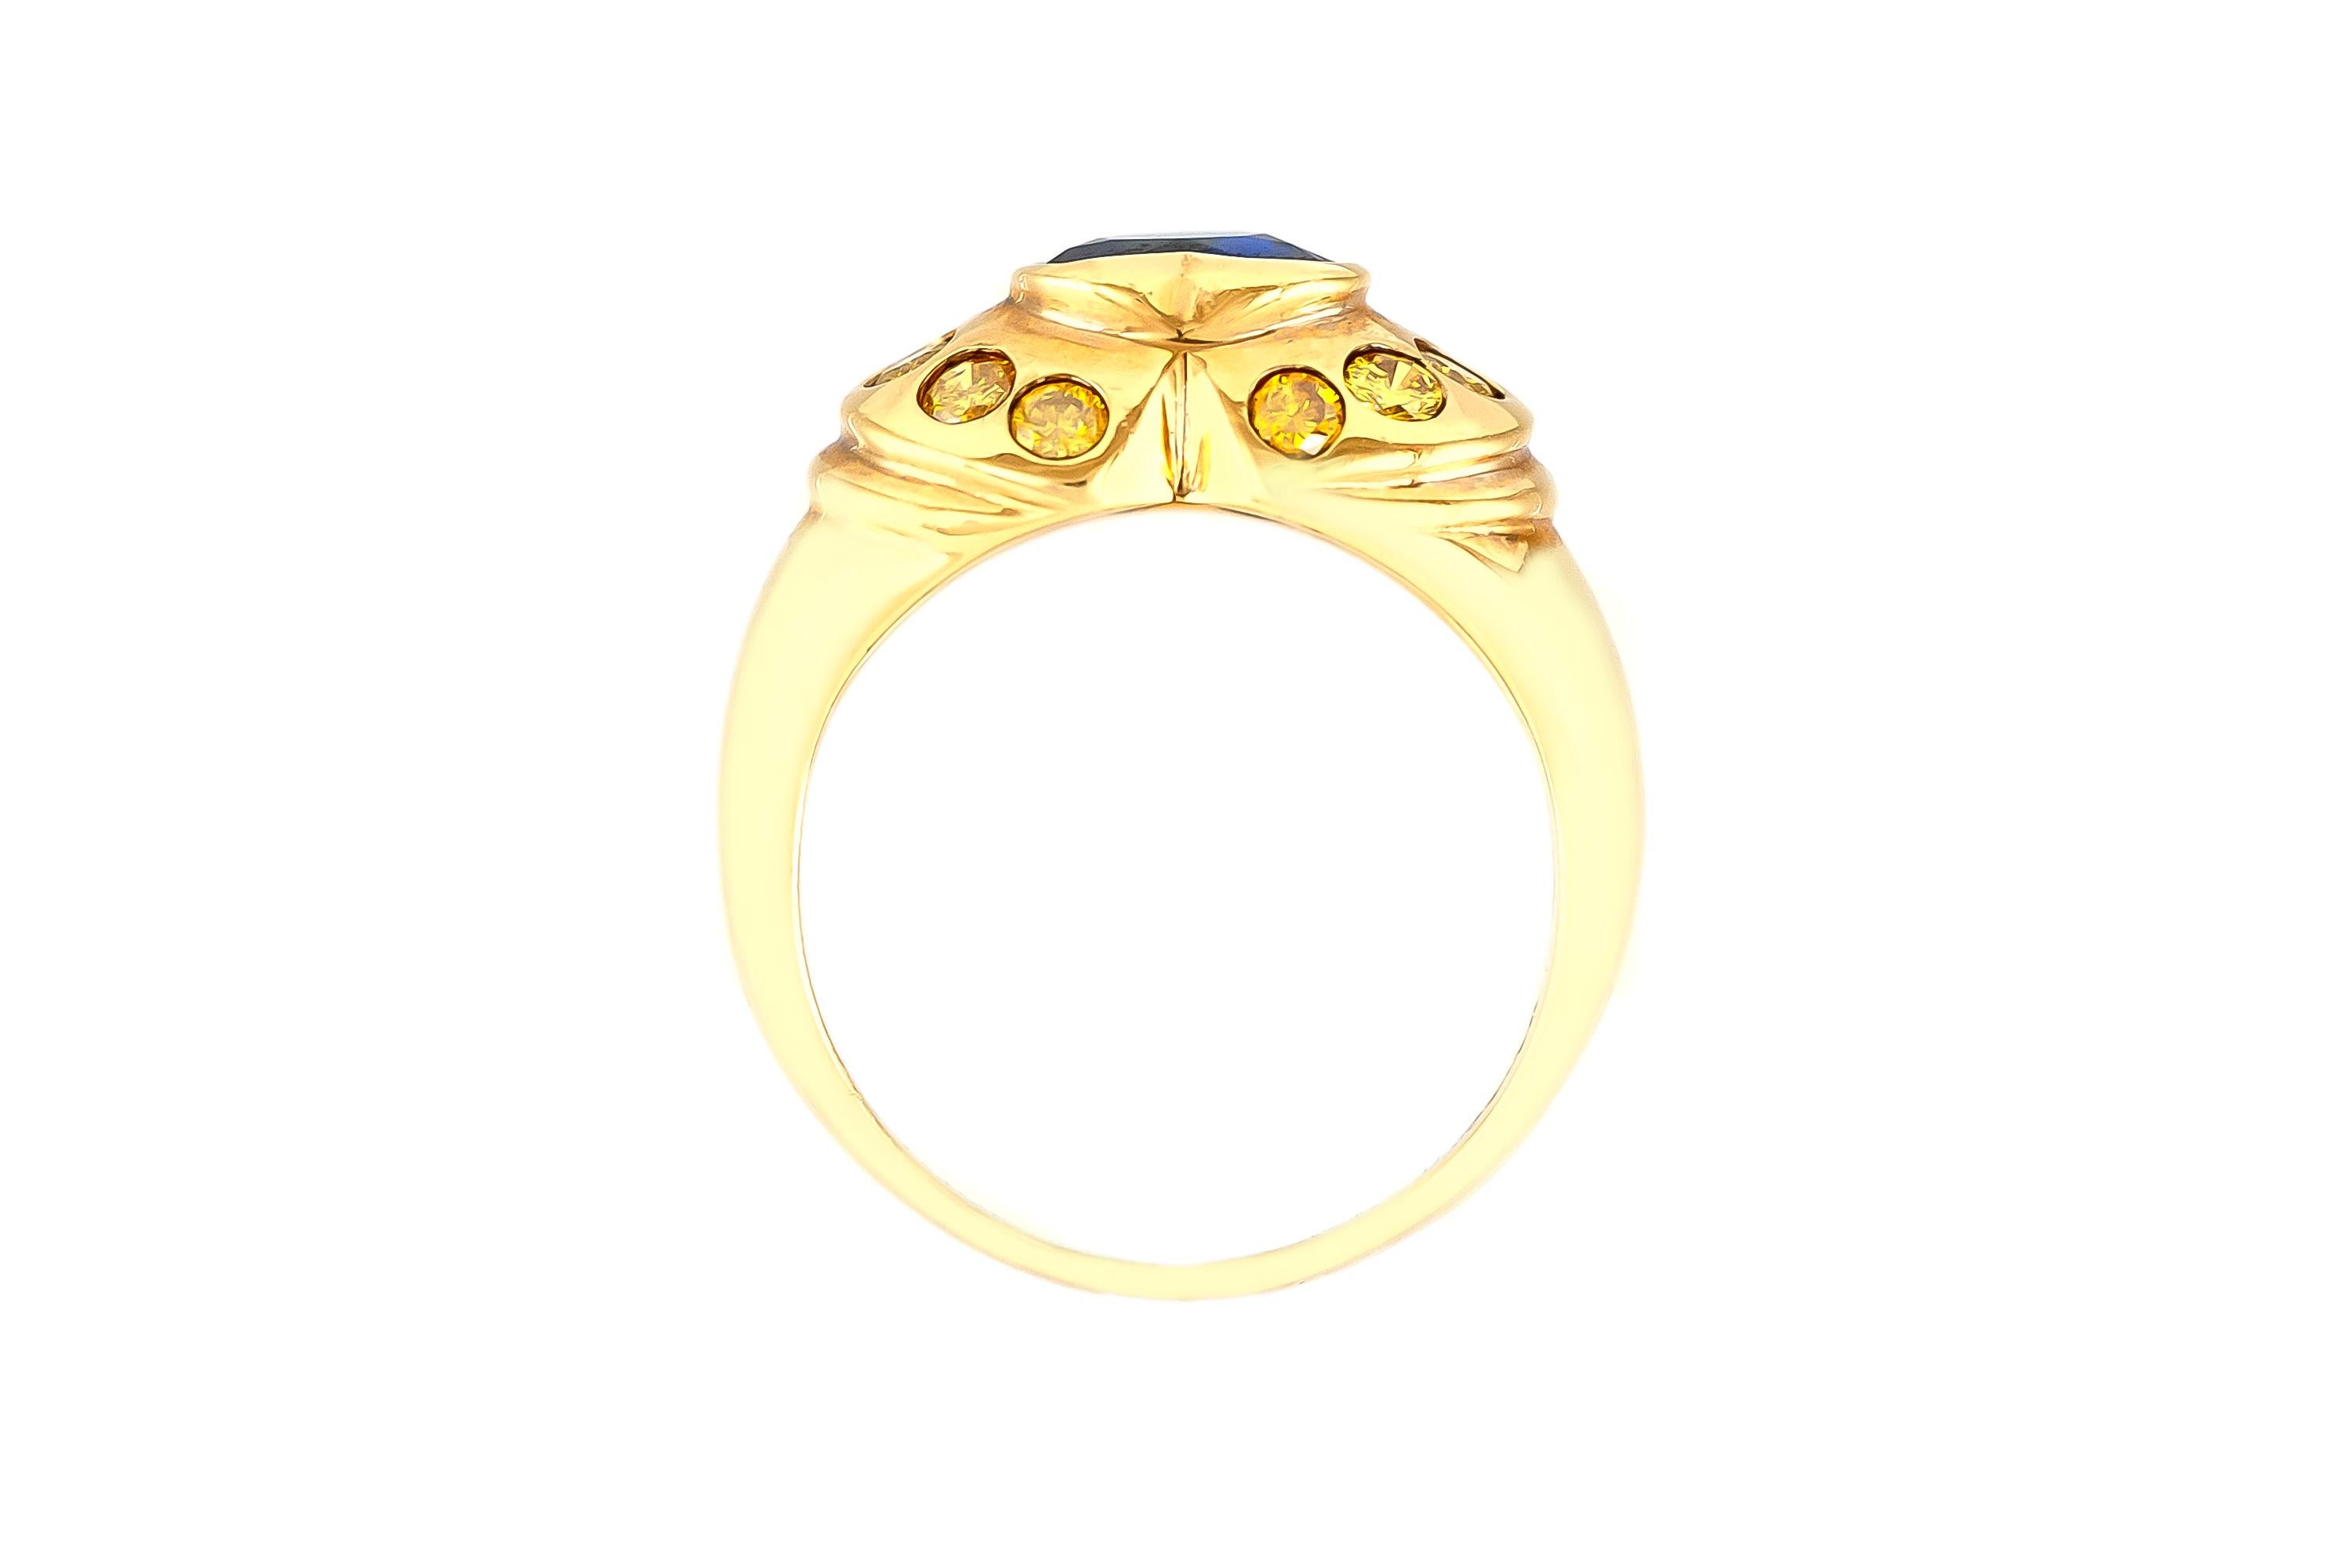 The ring is finely crafted in 18k yellow gold with natural yellow diamonds weighing approximately total of 0.50 and sapphire weighing approximately total of 1.59 carat.
Circa 1980.